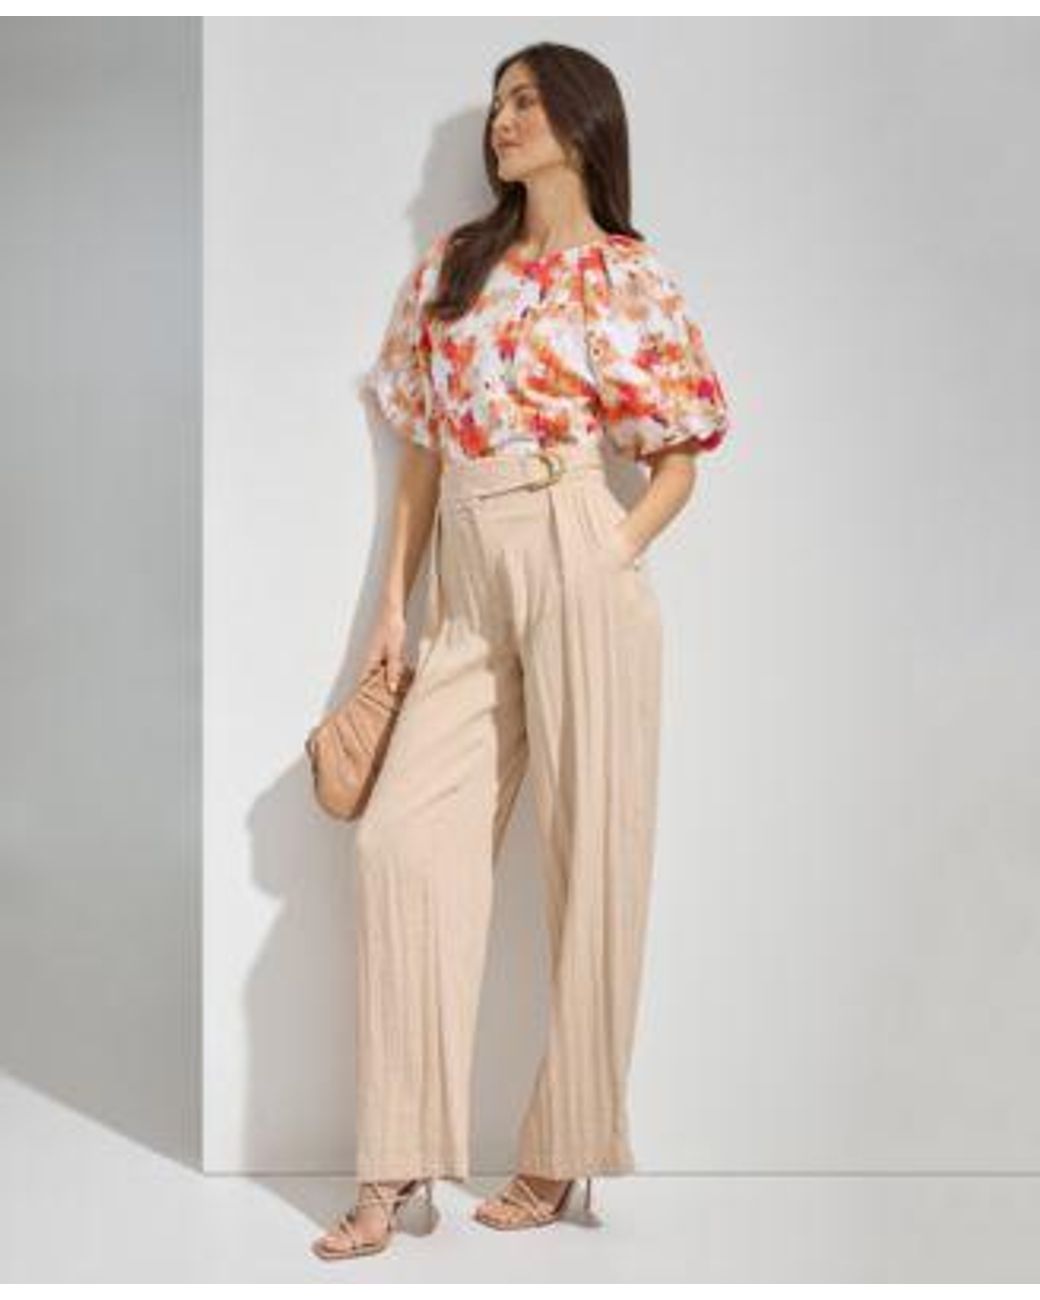 McCall's 7483 Misses' Short Sleeve Top and Pleated, Wide-Leg Pants